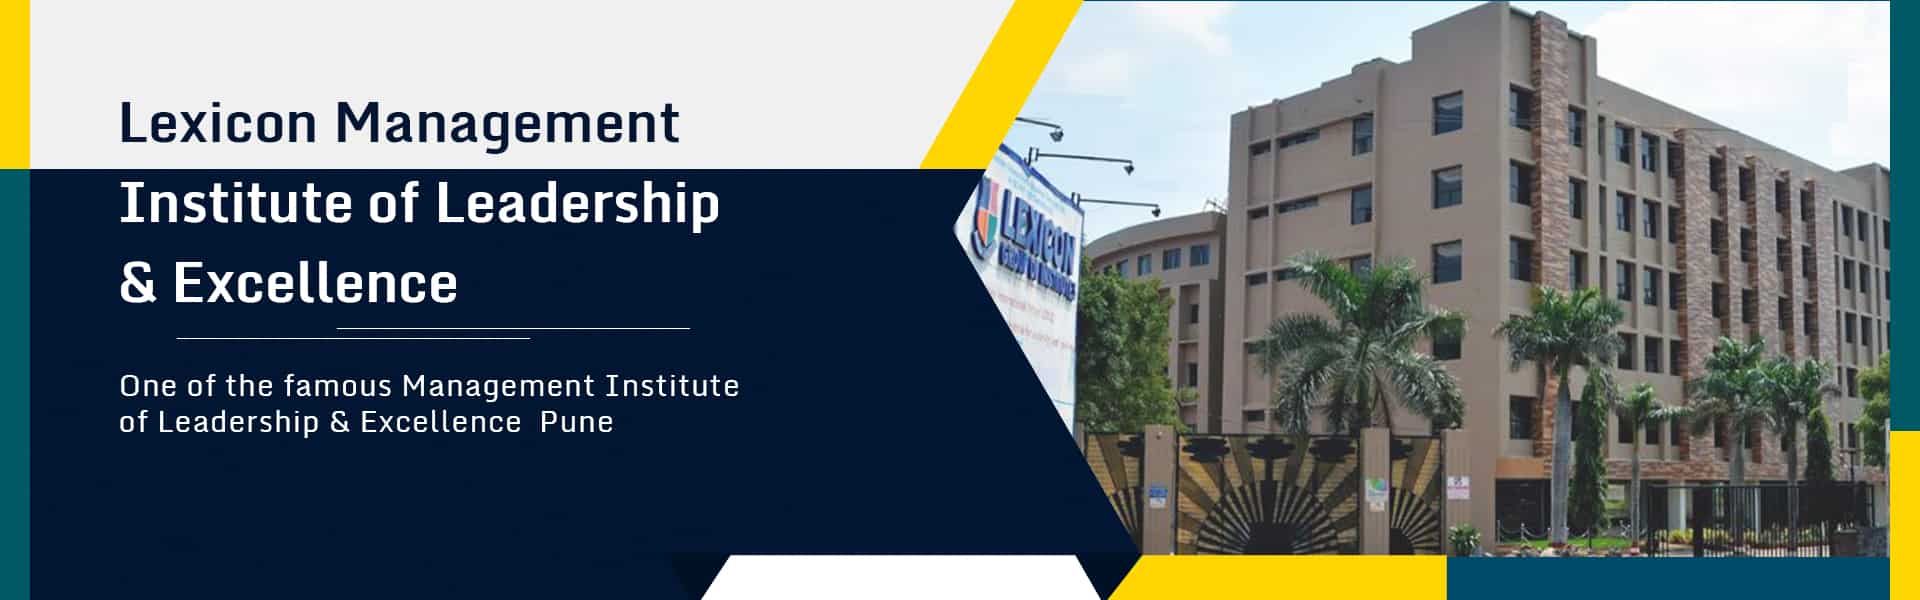 Lexicon Management Institute of Leadership and Excellence Pune Fees 2021